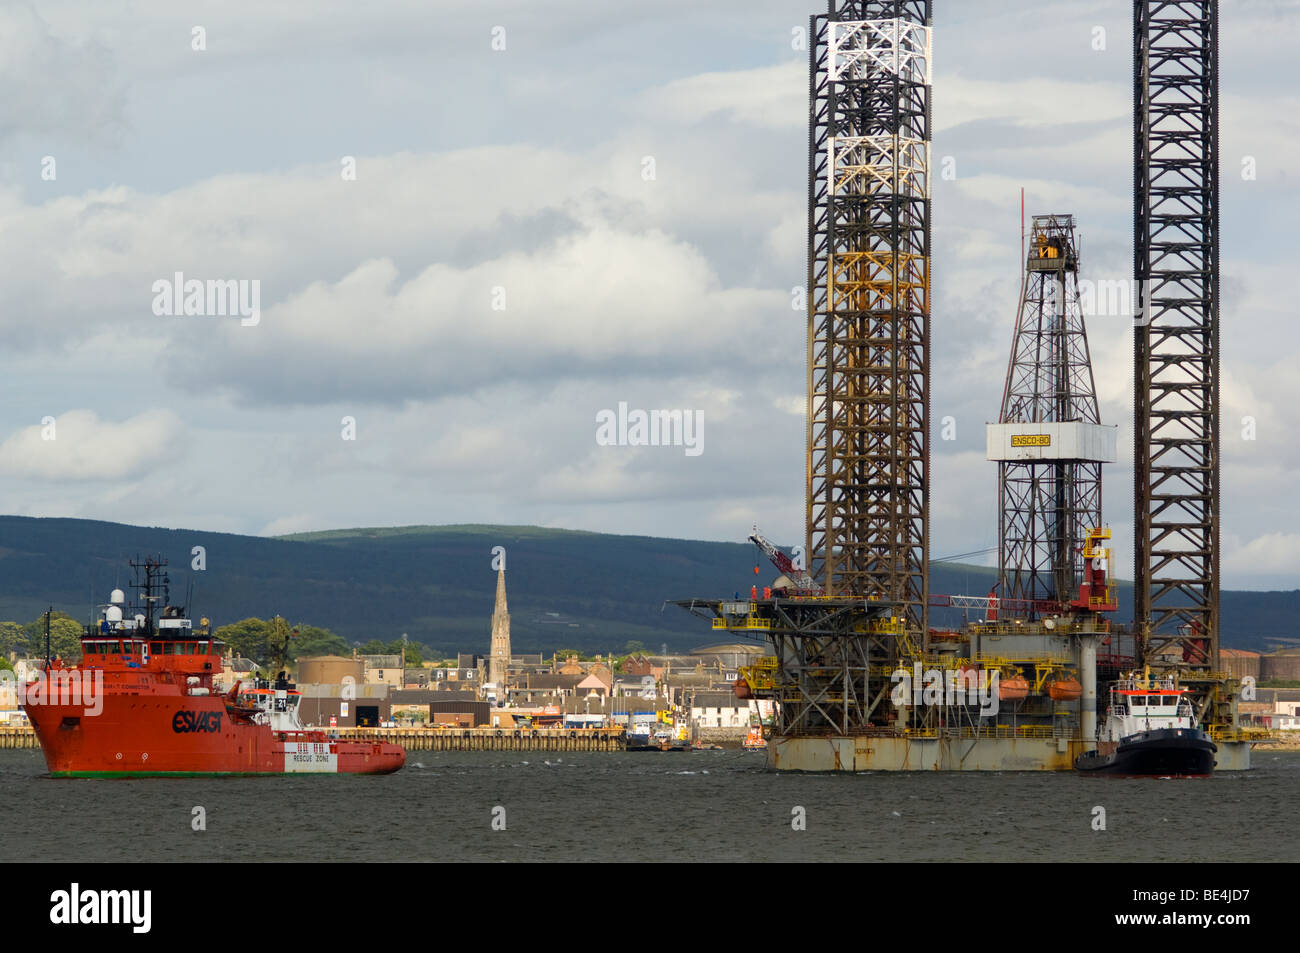 A jackup oil drilling rig, the Ensco 80, being towed up the Cromarty Firth, passing the town of Invergordon. Stock Photo